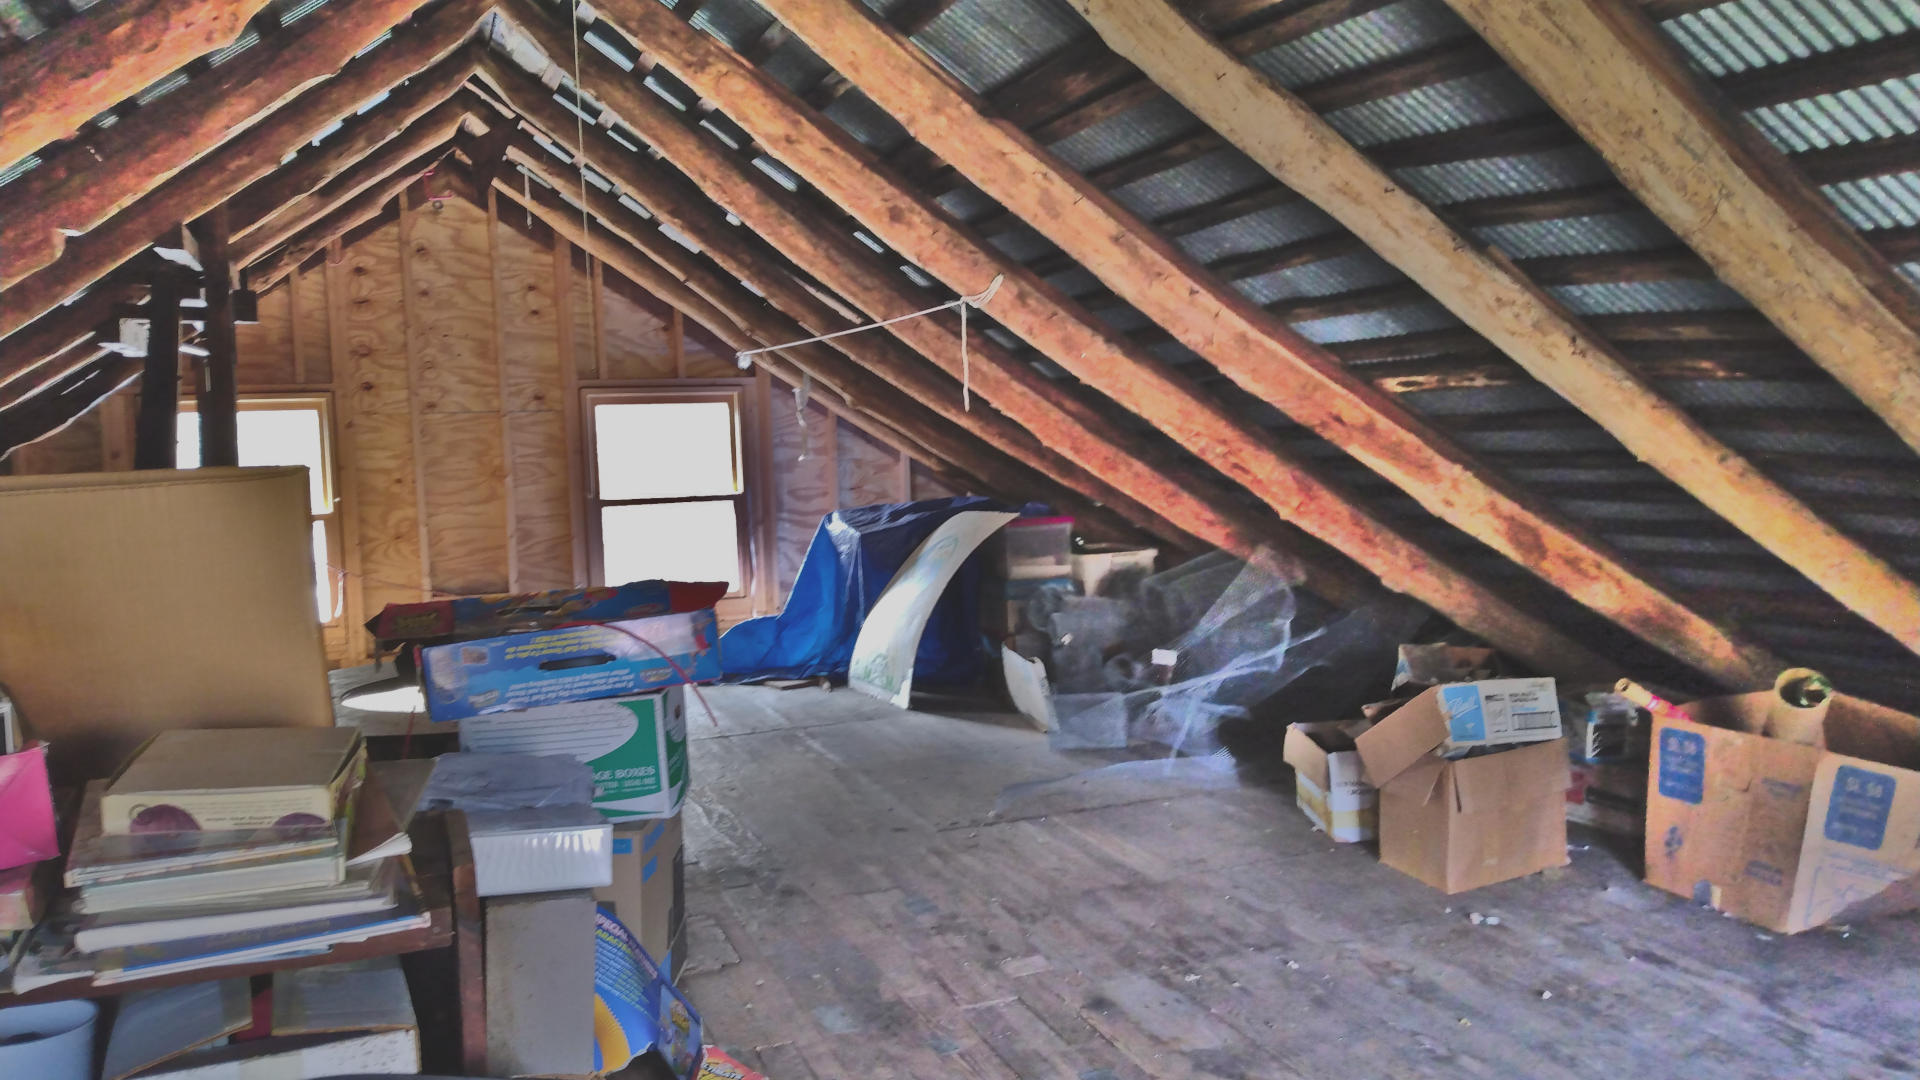 attic space with clutter